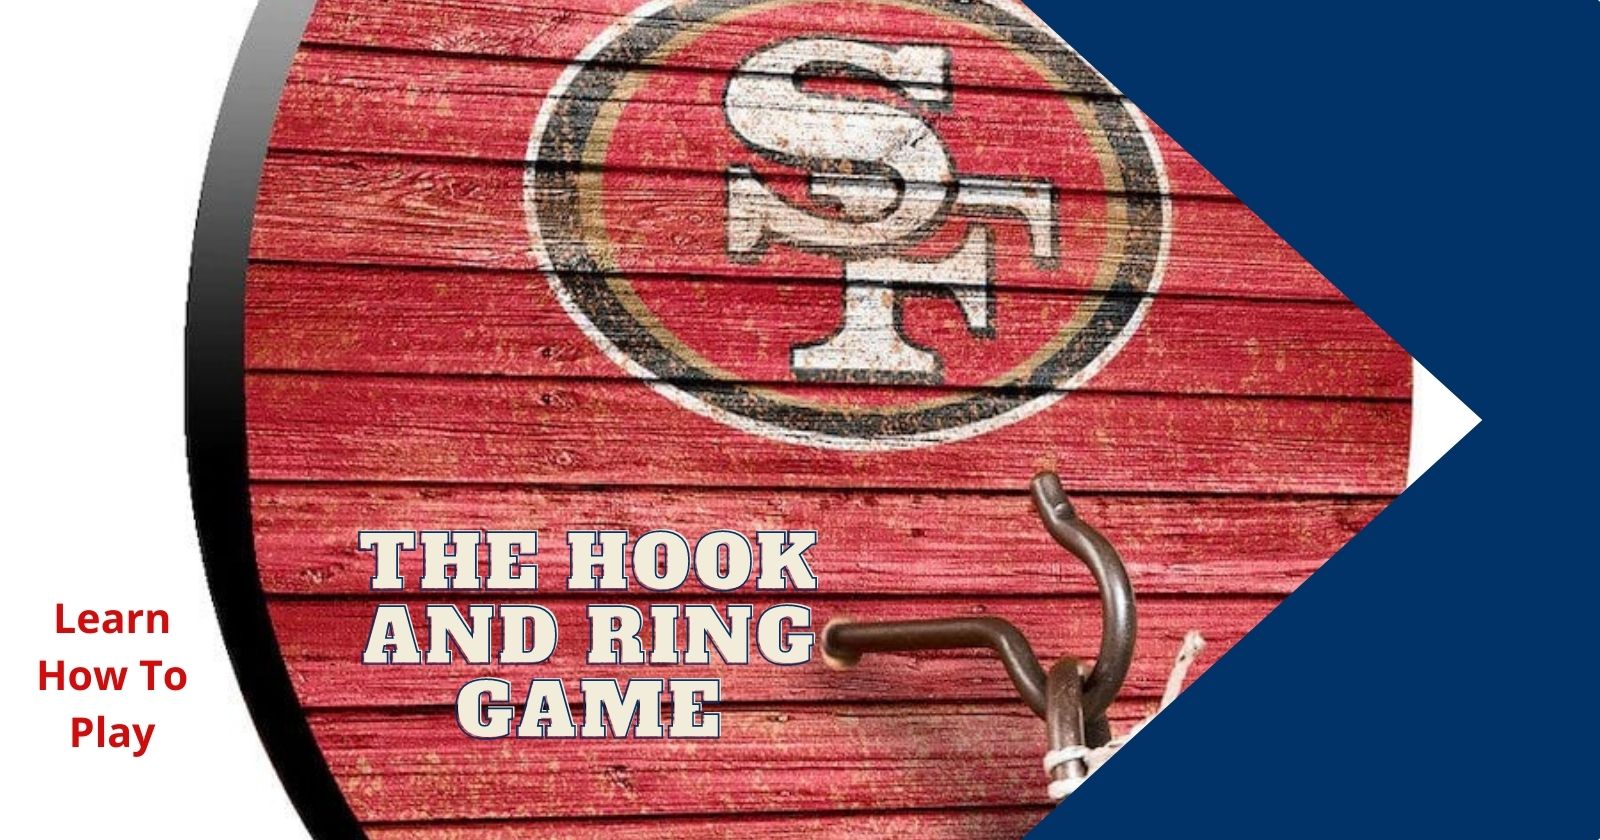 The Hook And Ring Game - Discover